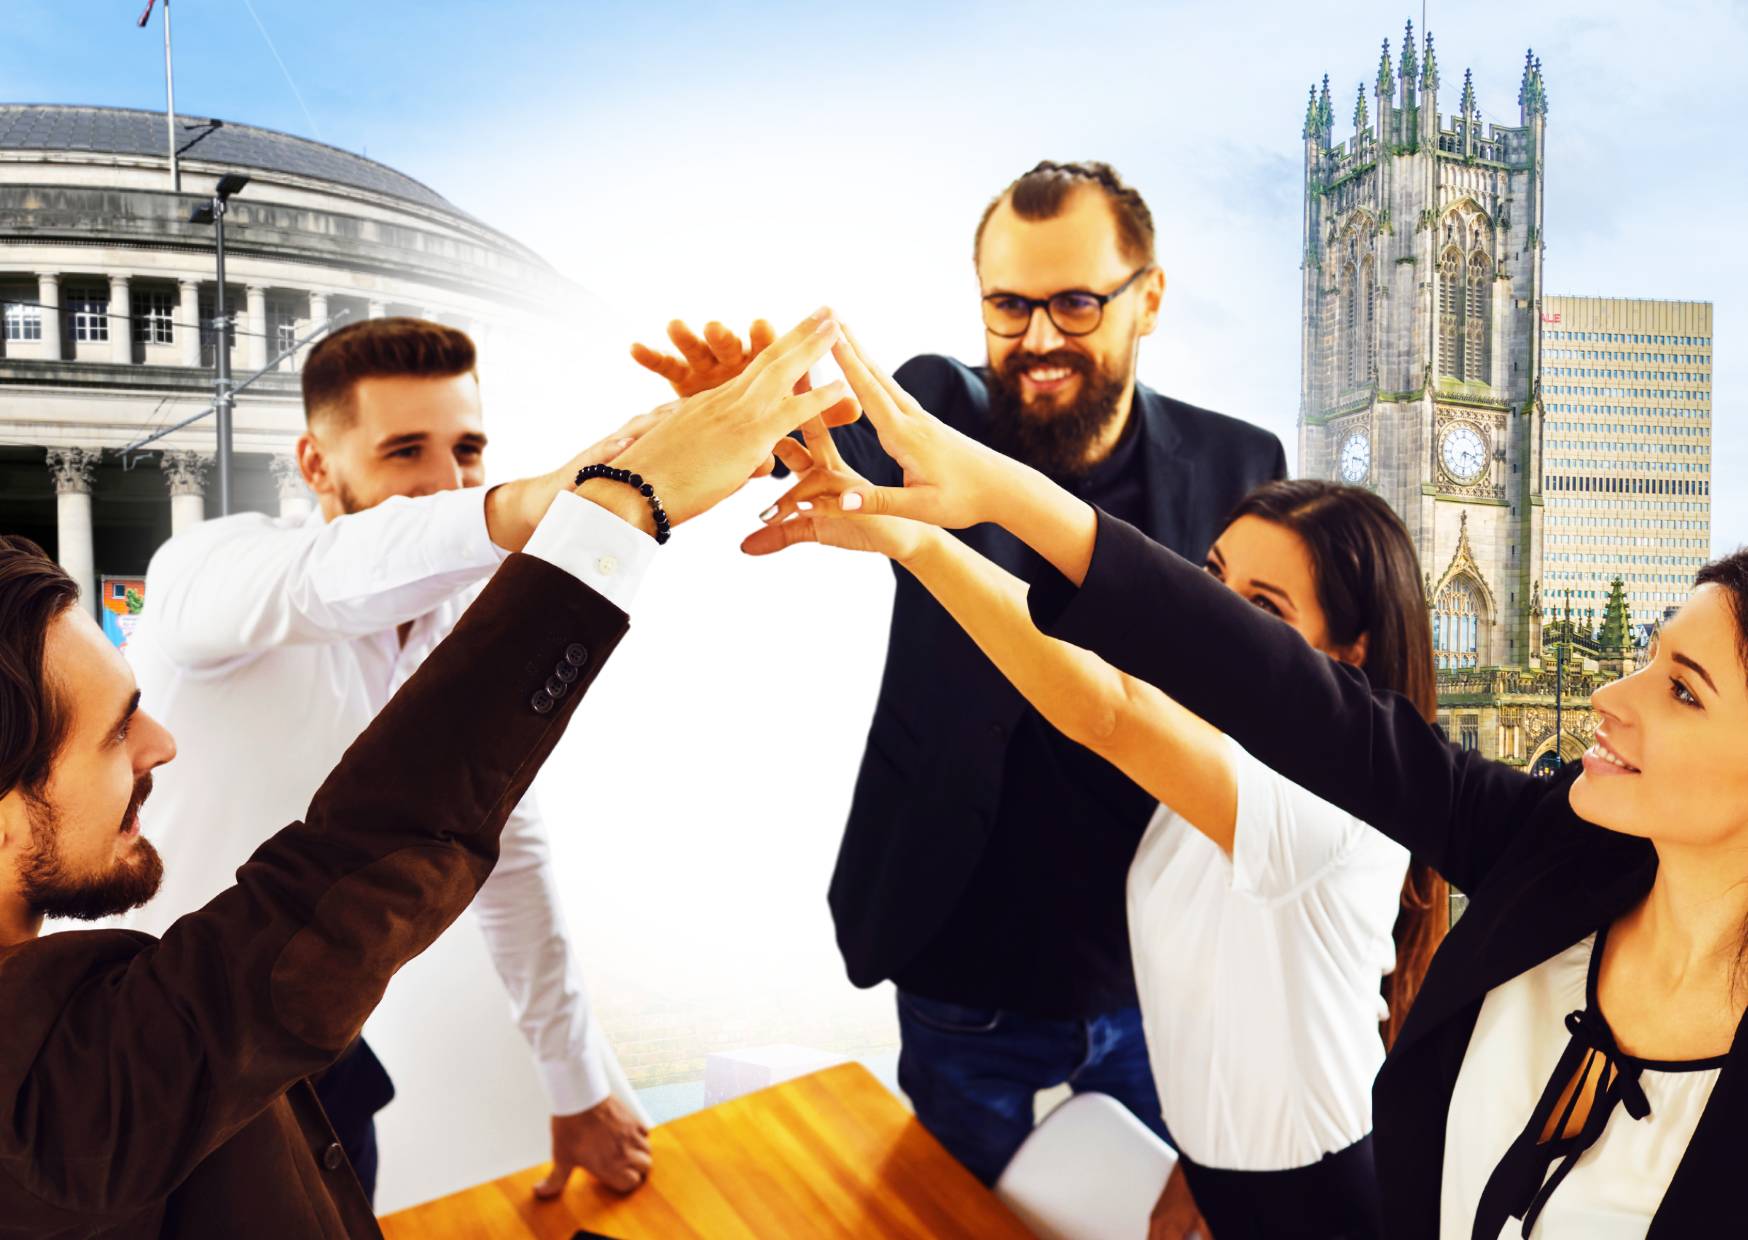 employees-with-hands-up-high-together-emphasising-team-building-with-famous-manchester-landmarks-in-the-background